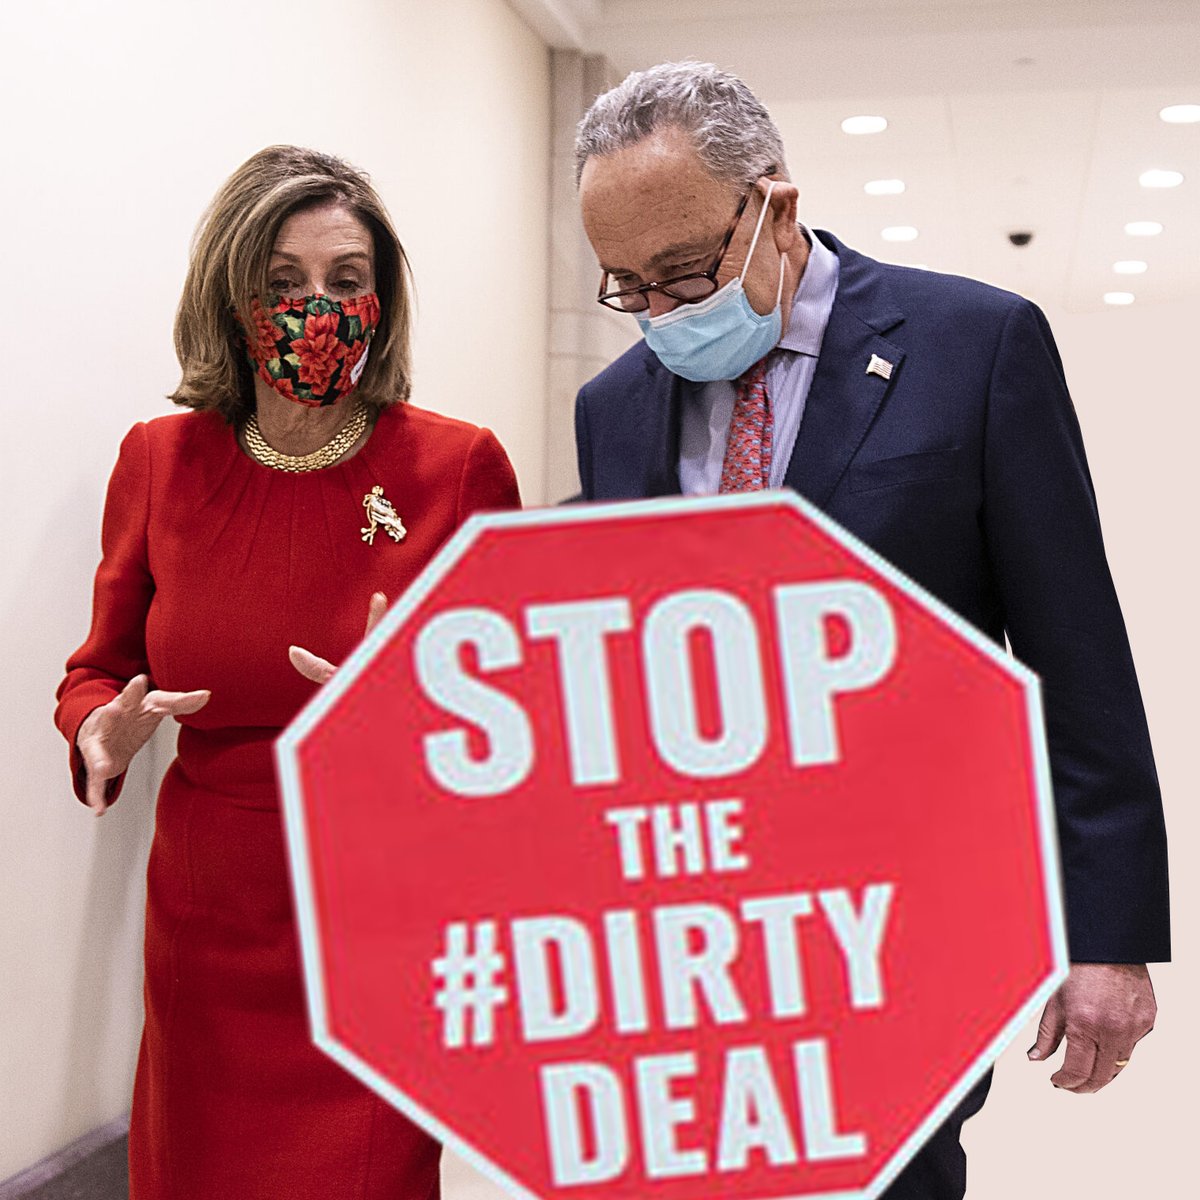 .@ChuckSchumer and @SpeakerPelosi, we need you to pull Manchin's #DirtyDeal. Don't let your legacy be one of fast tracking fossil fuel projects and harming Black, Brown, and other frontline communities.